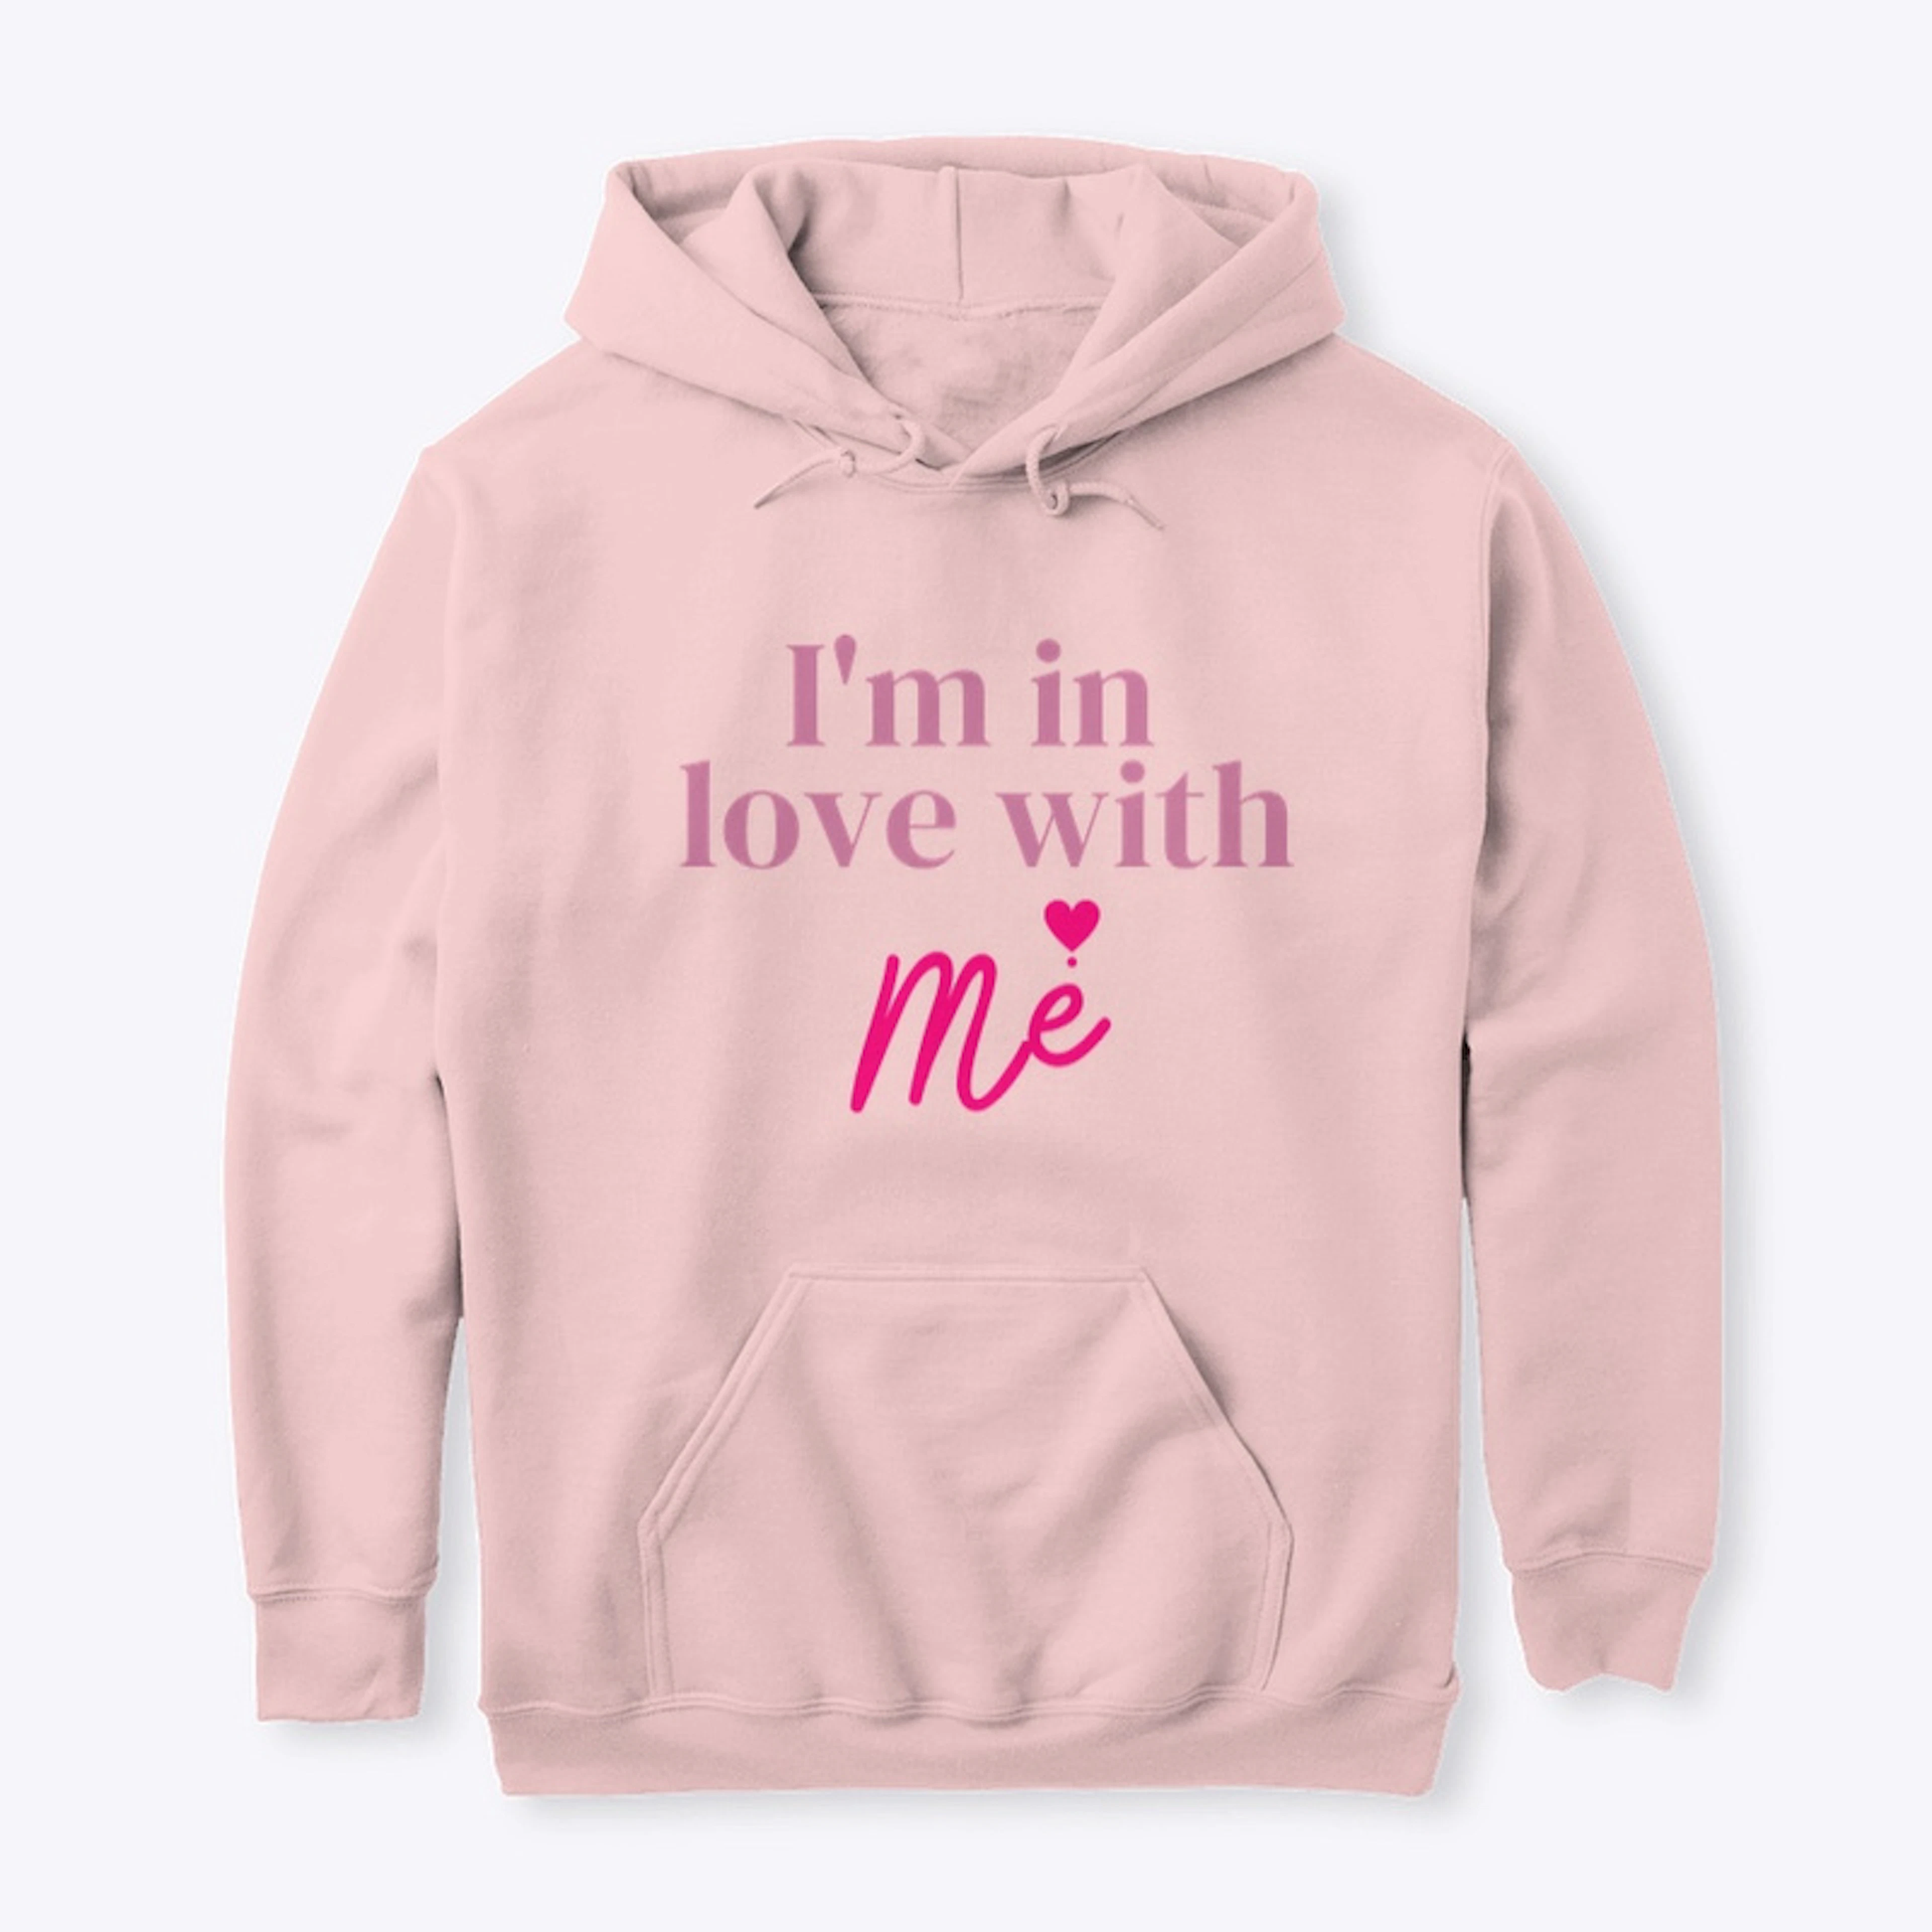 I'm in love with me Hoddie